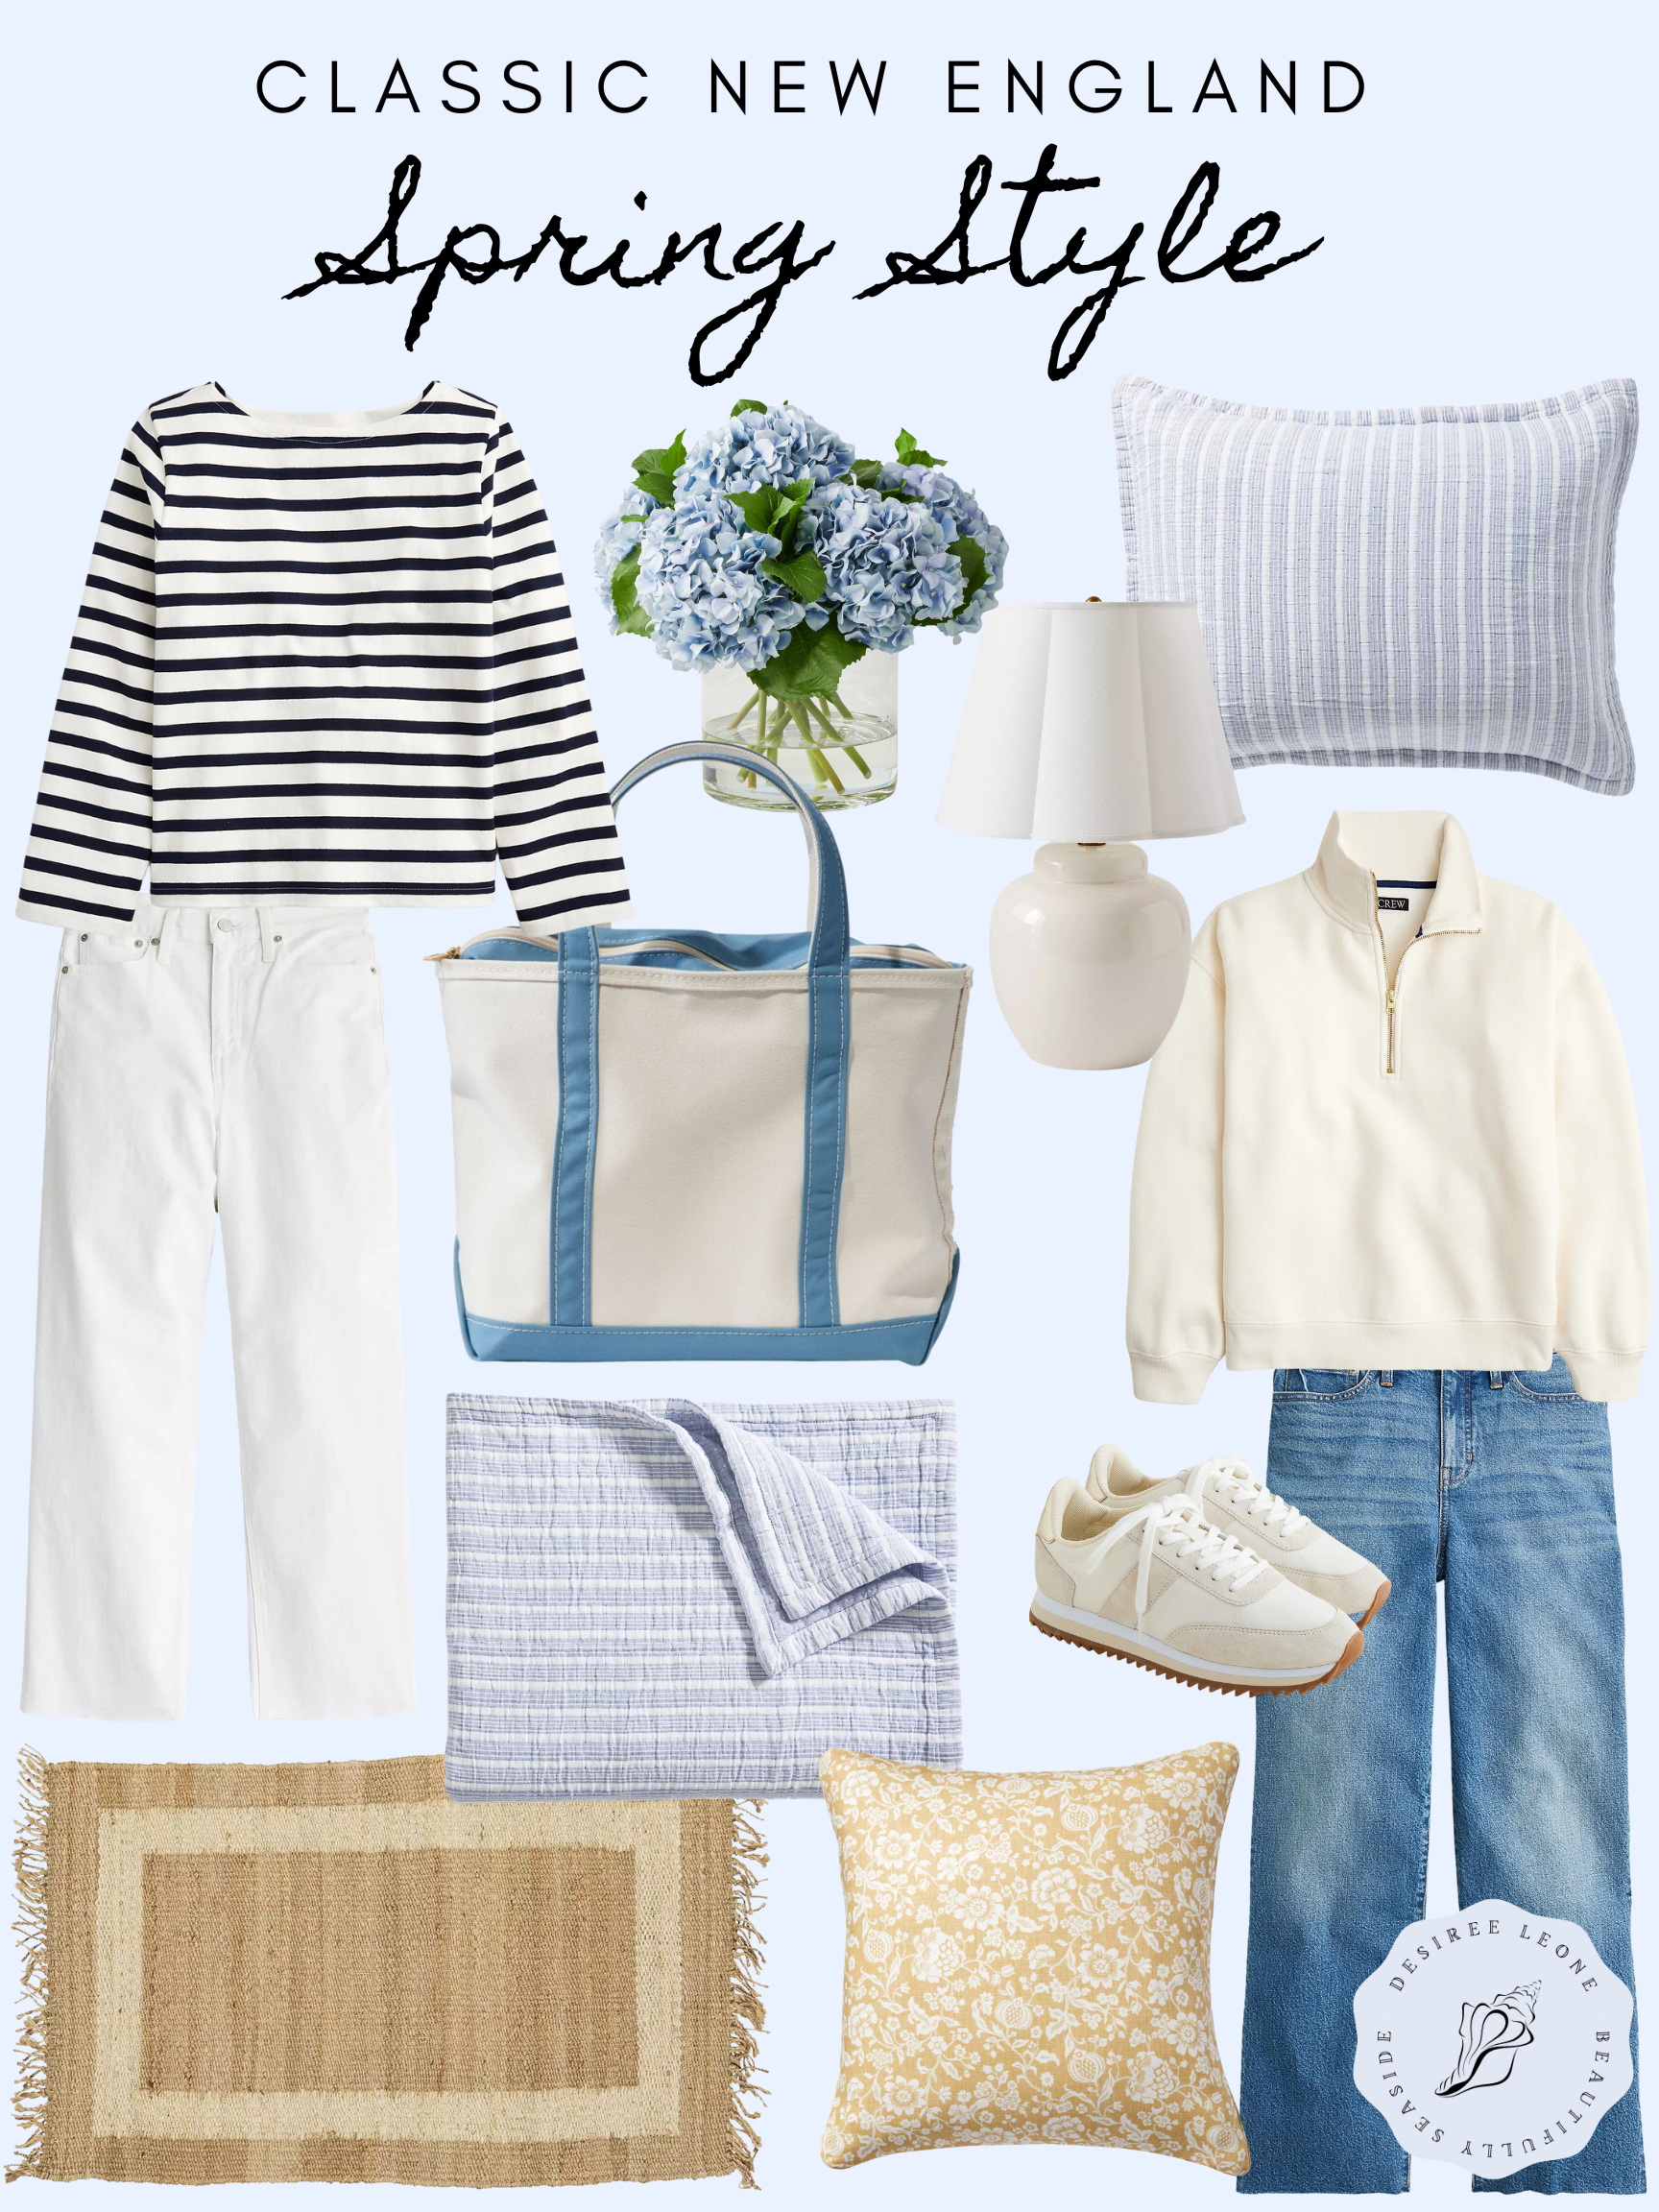 Desiree Leone of Beautifully Seaside shares classic New England spring style featuring the best styles for you and your home.